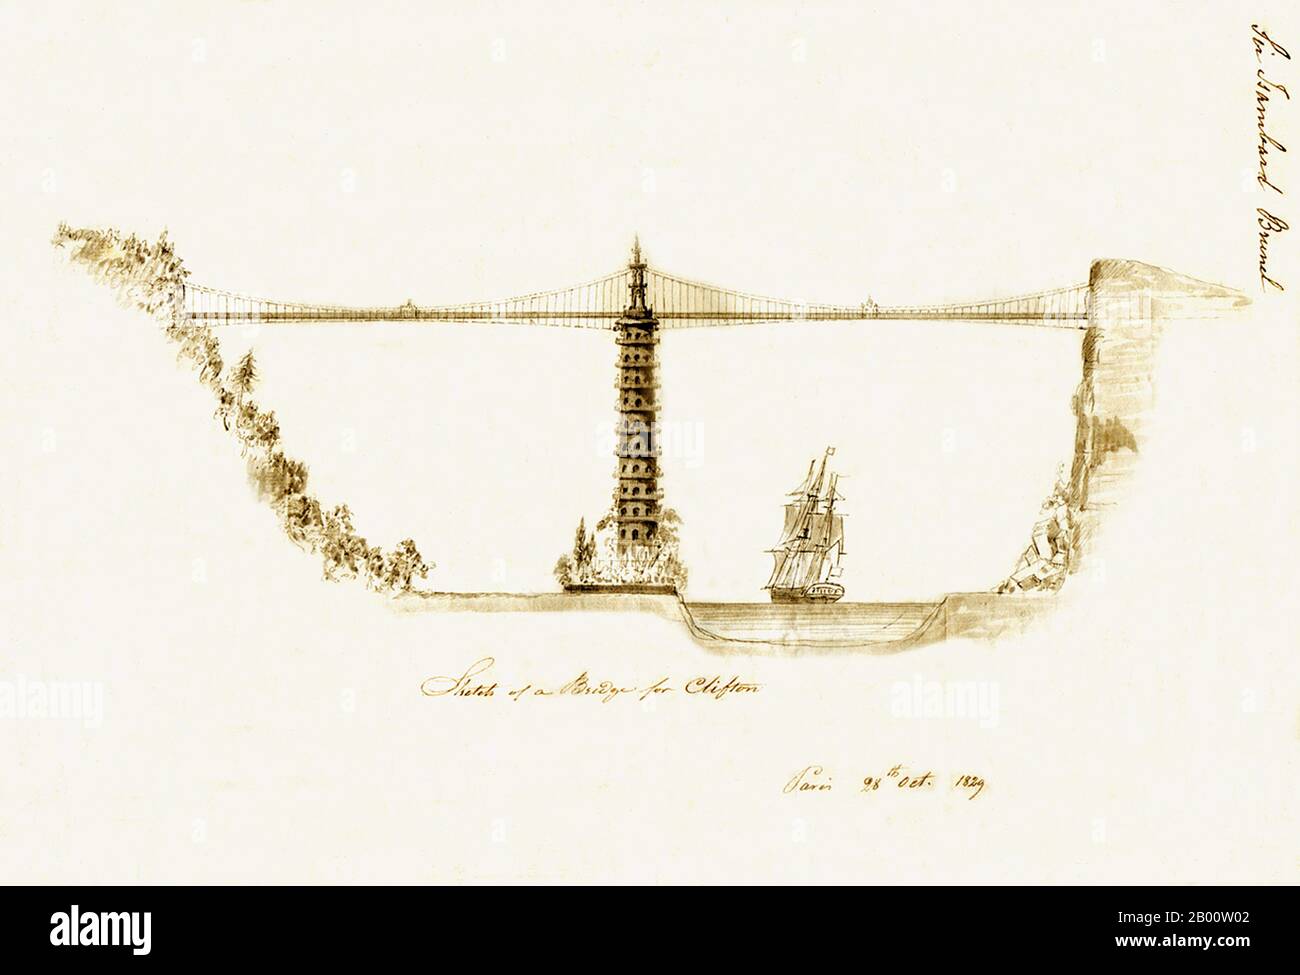 England: A remarkable design for a 'Chinoiserie' bridge across the Avon Gorge at Bristol by Sir Isambard Kingdom Brunel (1806-1859), dated Paris, 28 October 1829.  The Clifton Suspension Bridge was eventually completed in 1864 after Brunel's design, but without the pagoda. Stock Photo